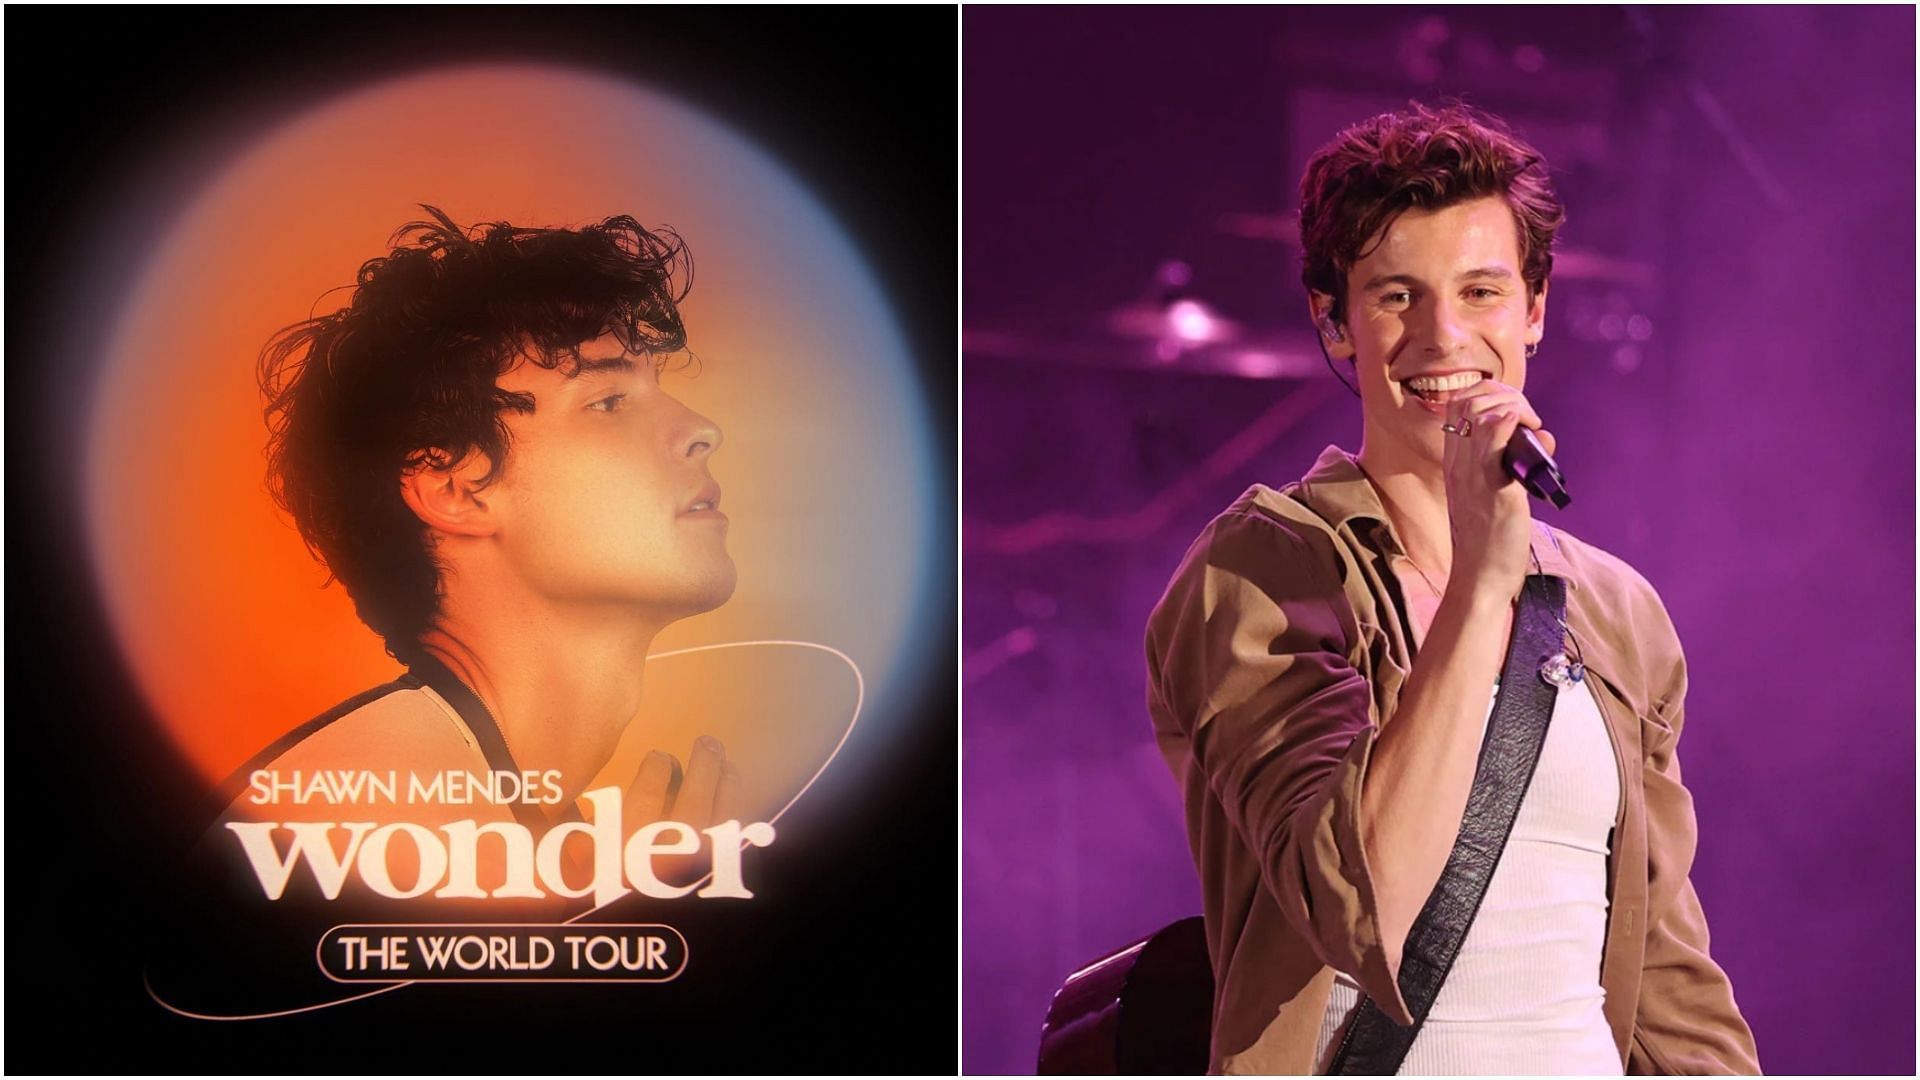 Shawn Mendes has announced inititatives for a climate-friendly tour. (Images via Instagram / @ShawnMendes and Amy Sussman / Getty)